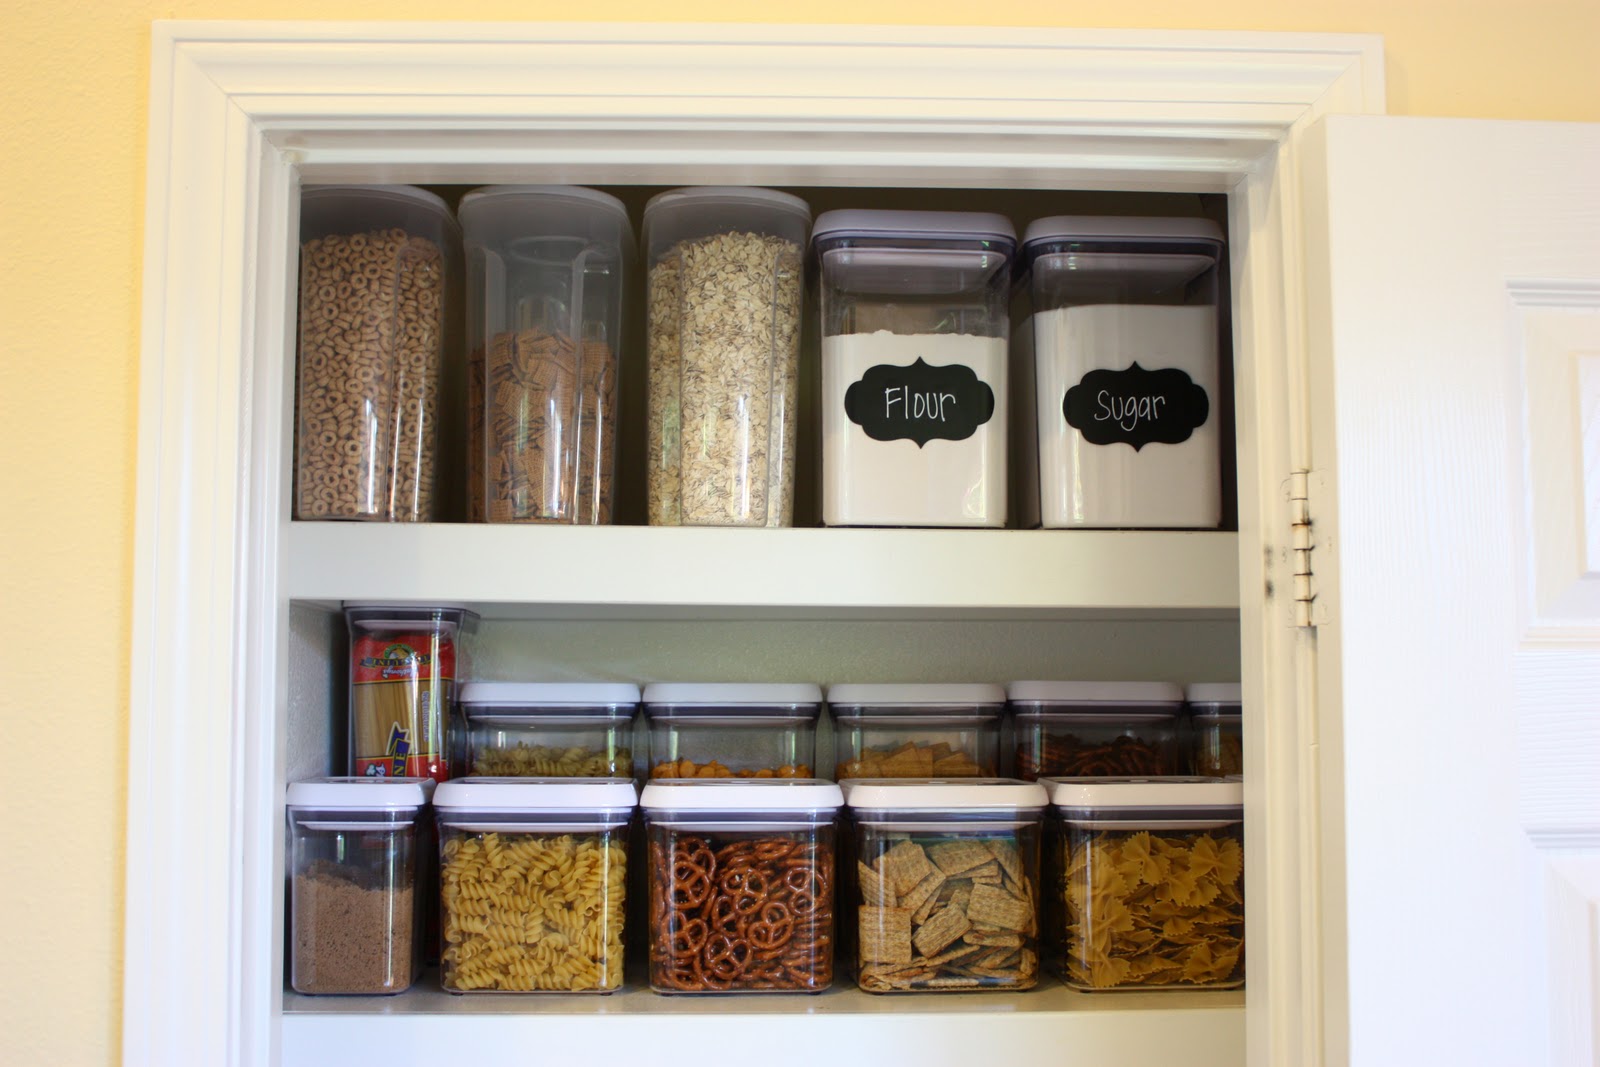 Finally got my air tight OXO containersthe pantry is starting to look a  bit more organized. : r/organization